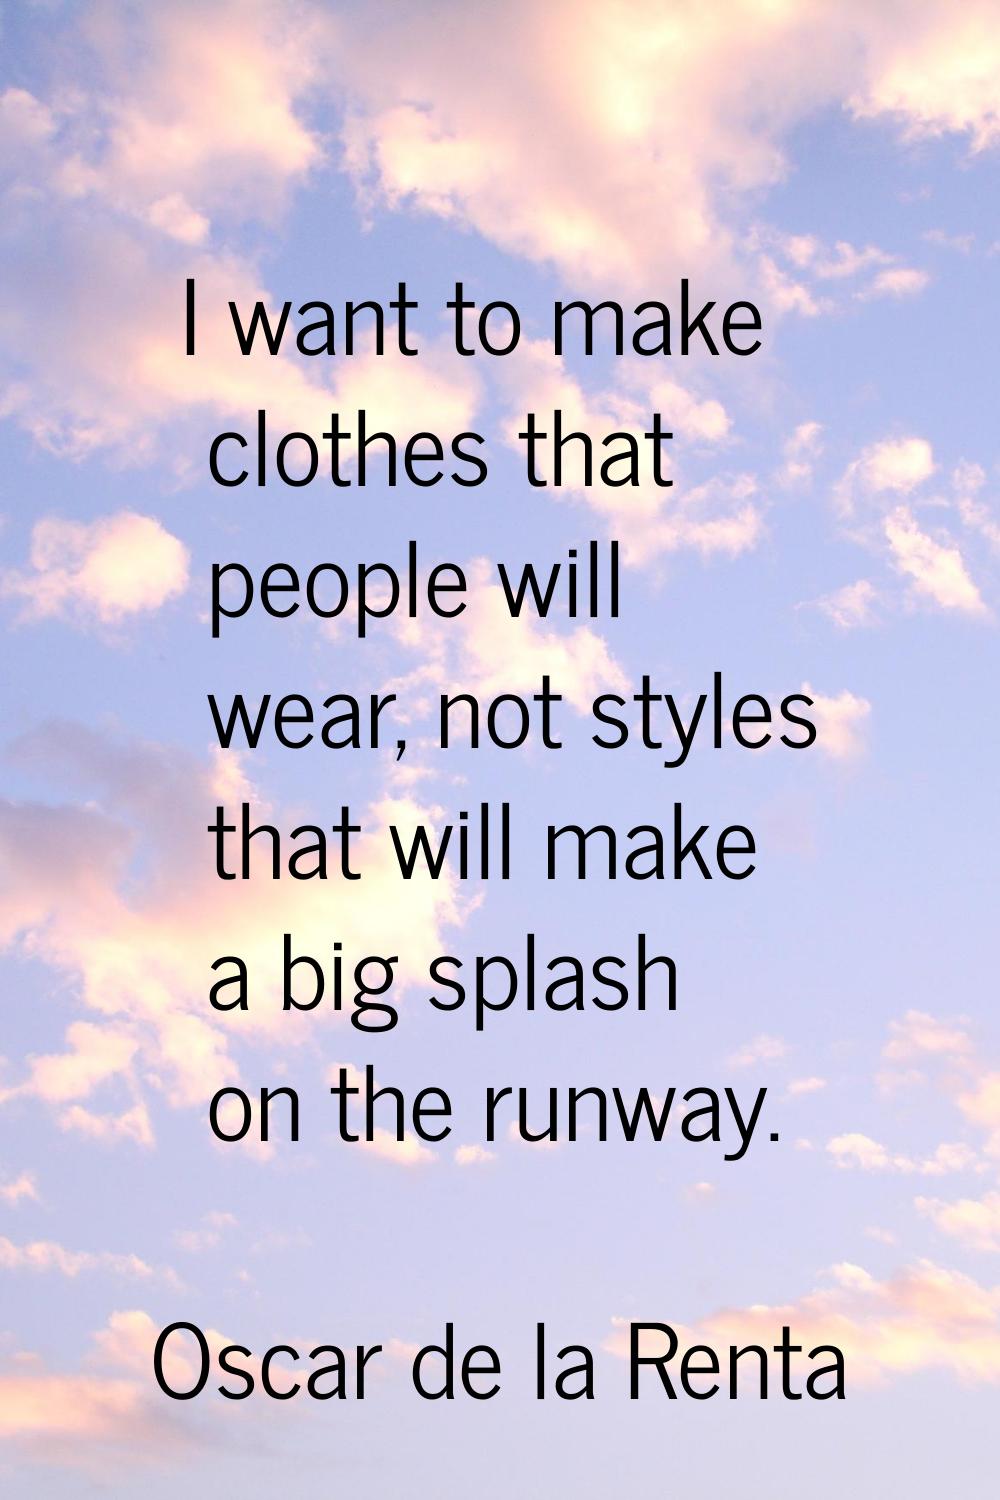 I want to make clothes that people will wear, not styles that will make a big splash on the runway.